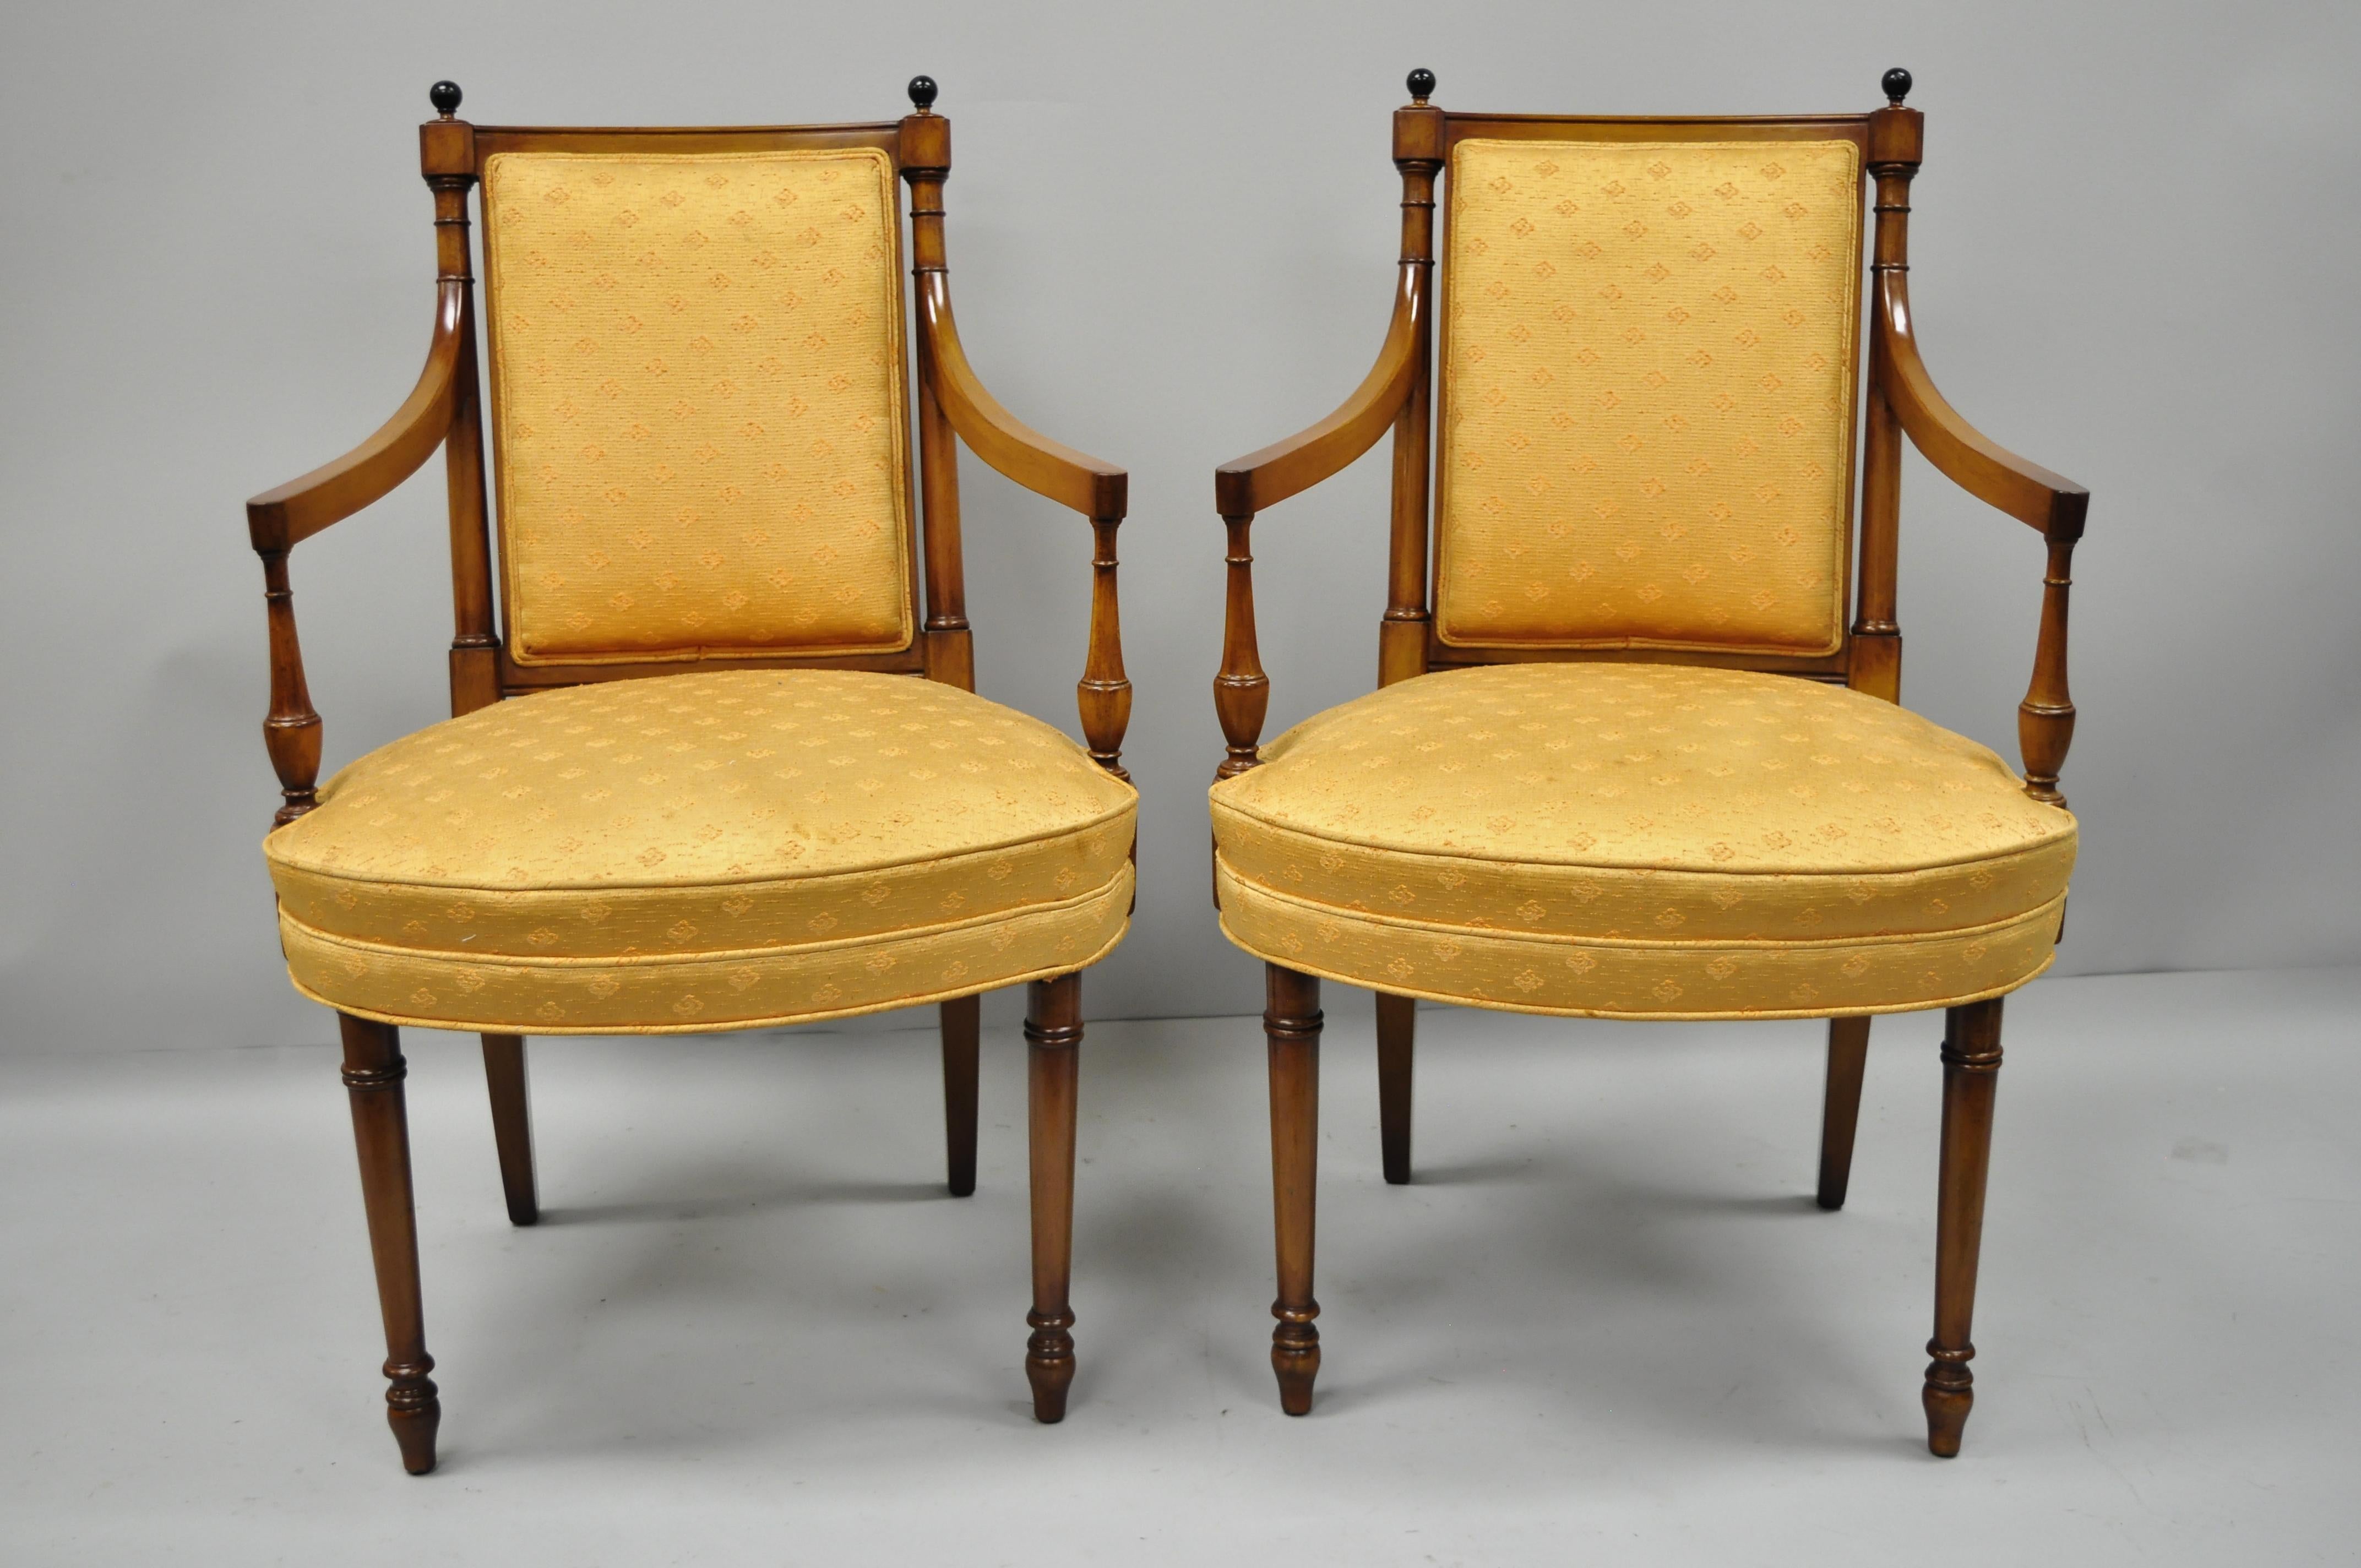 Set of eight Maslow Freen mahogany dining chairs. Listing includes six side chairs, two armchairs, wooden ball form finials, nice wide seats, solid wood construction, and quality American craftsmanship, circa 1940s. Measurements: Armchairs 38